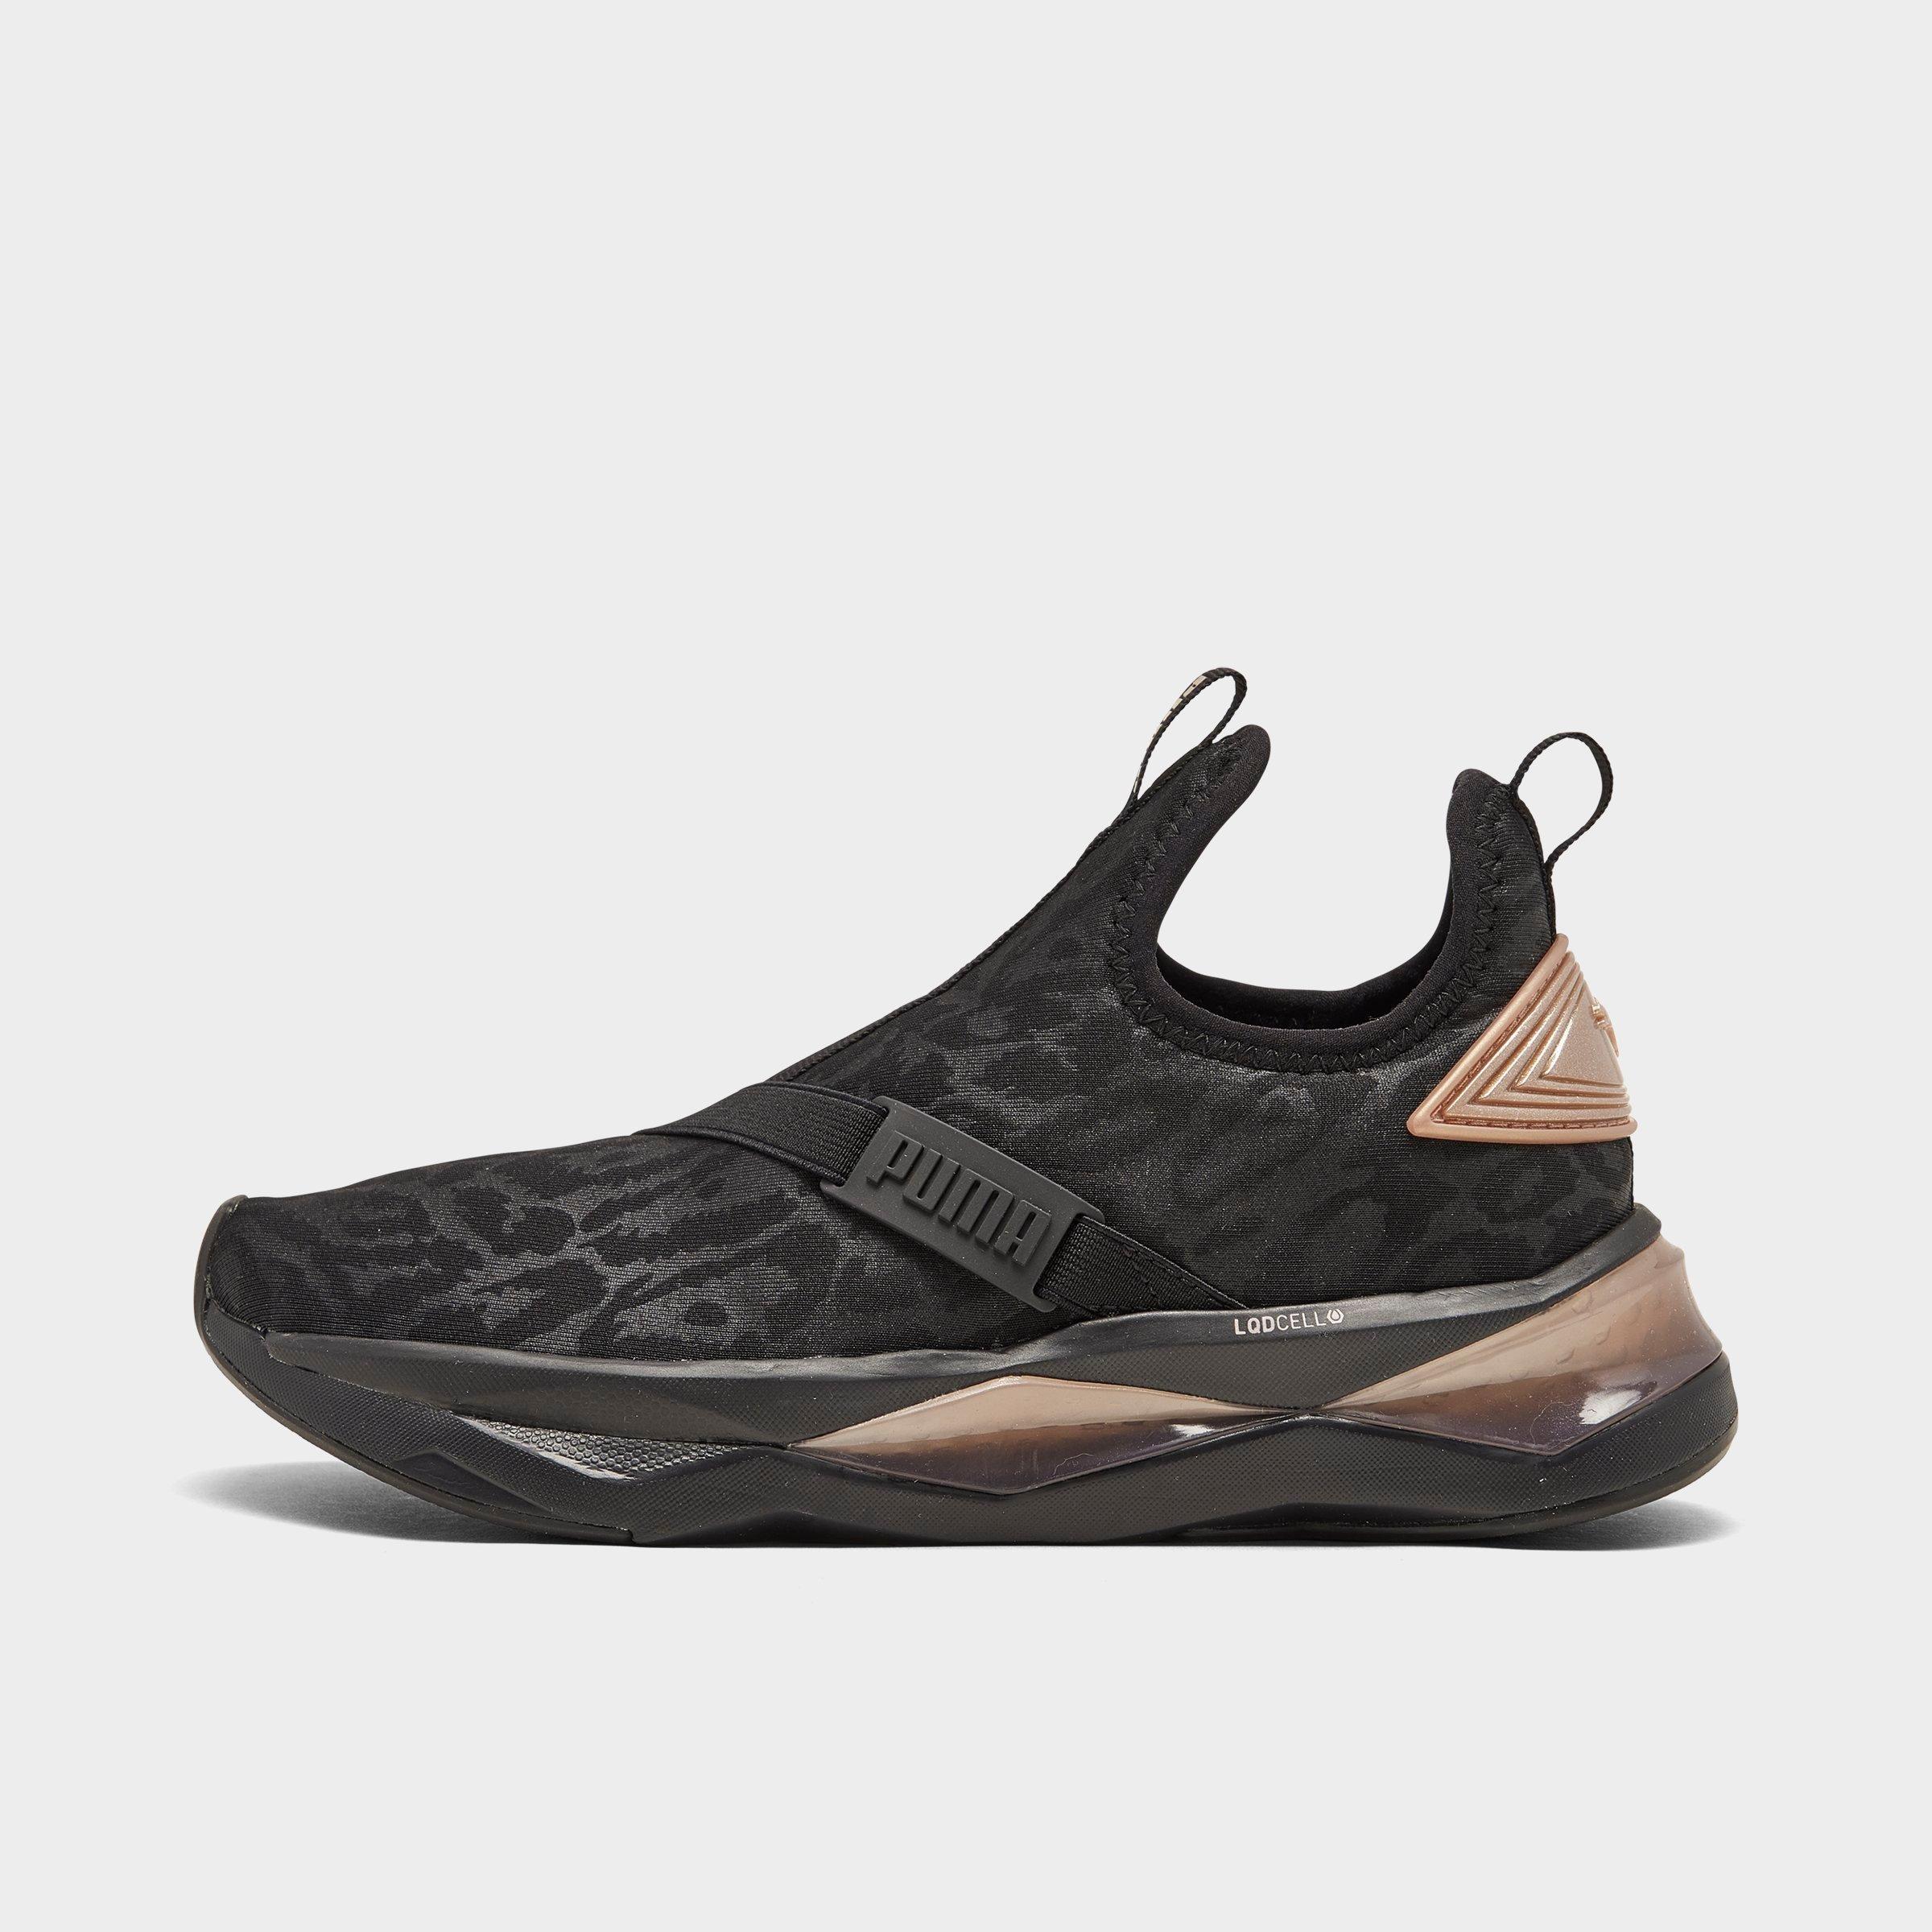 puma black and rose gold shoes